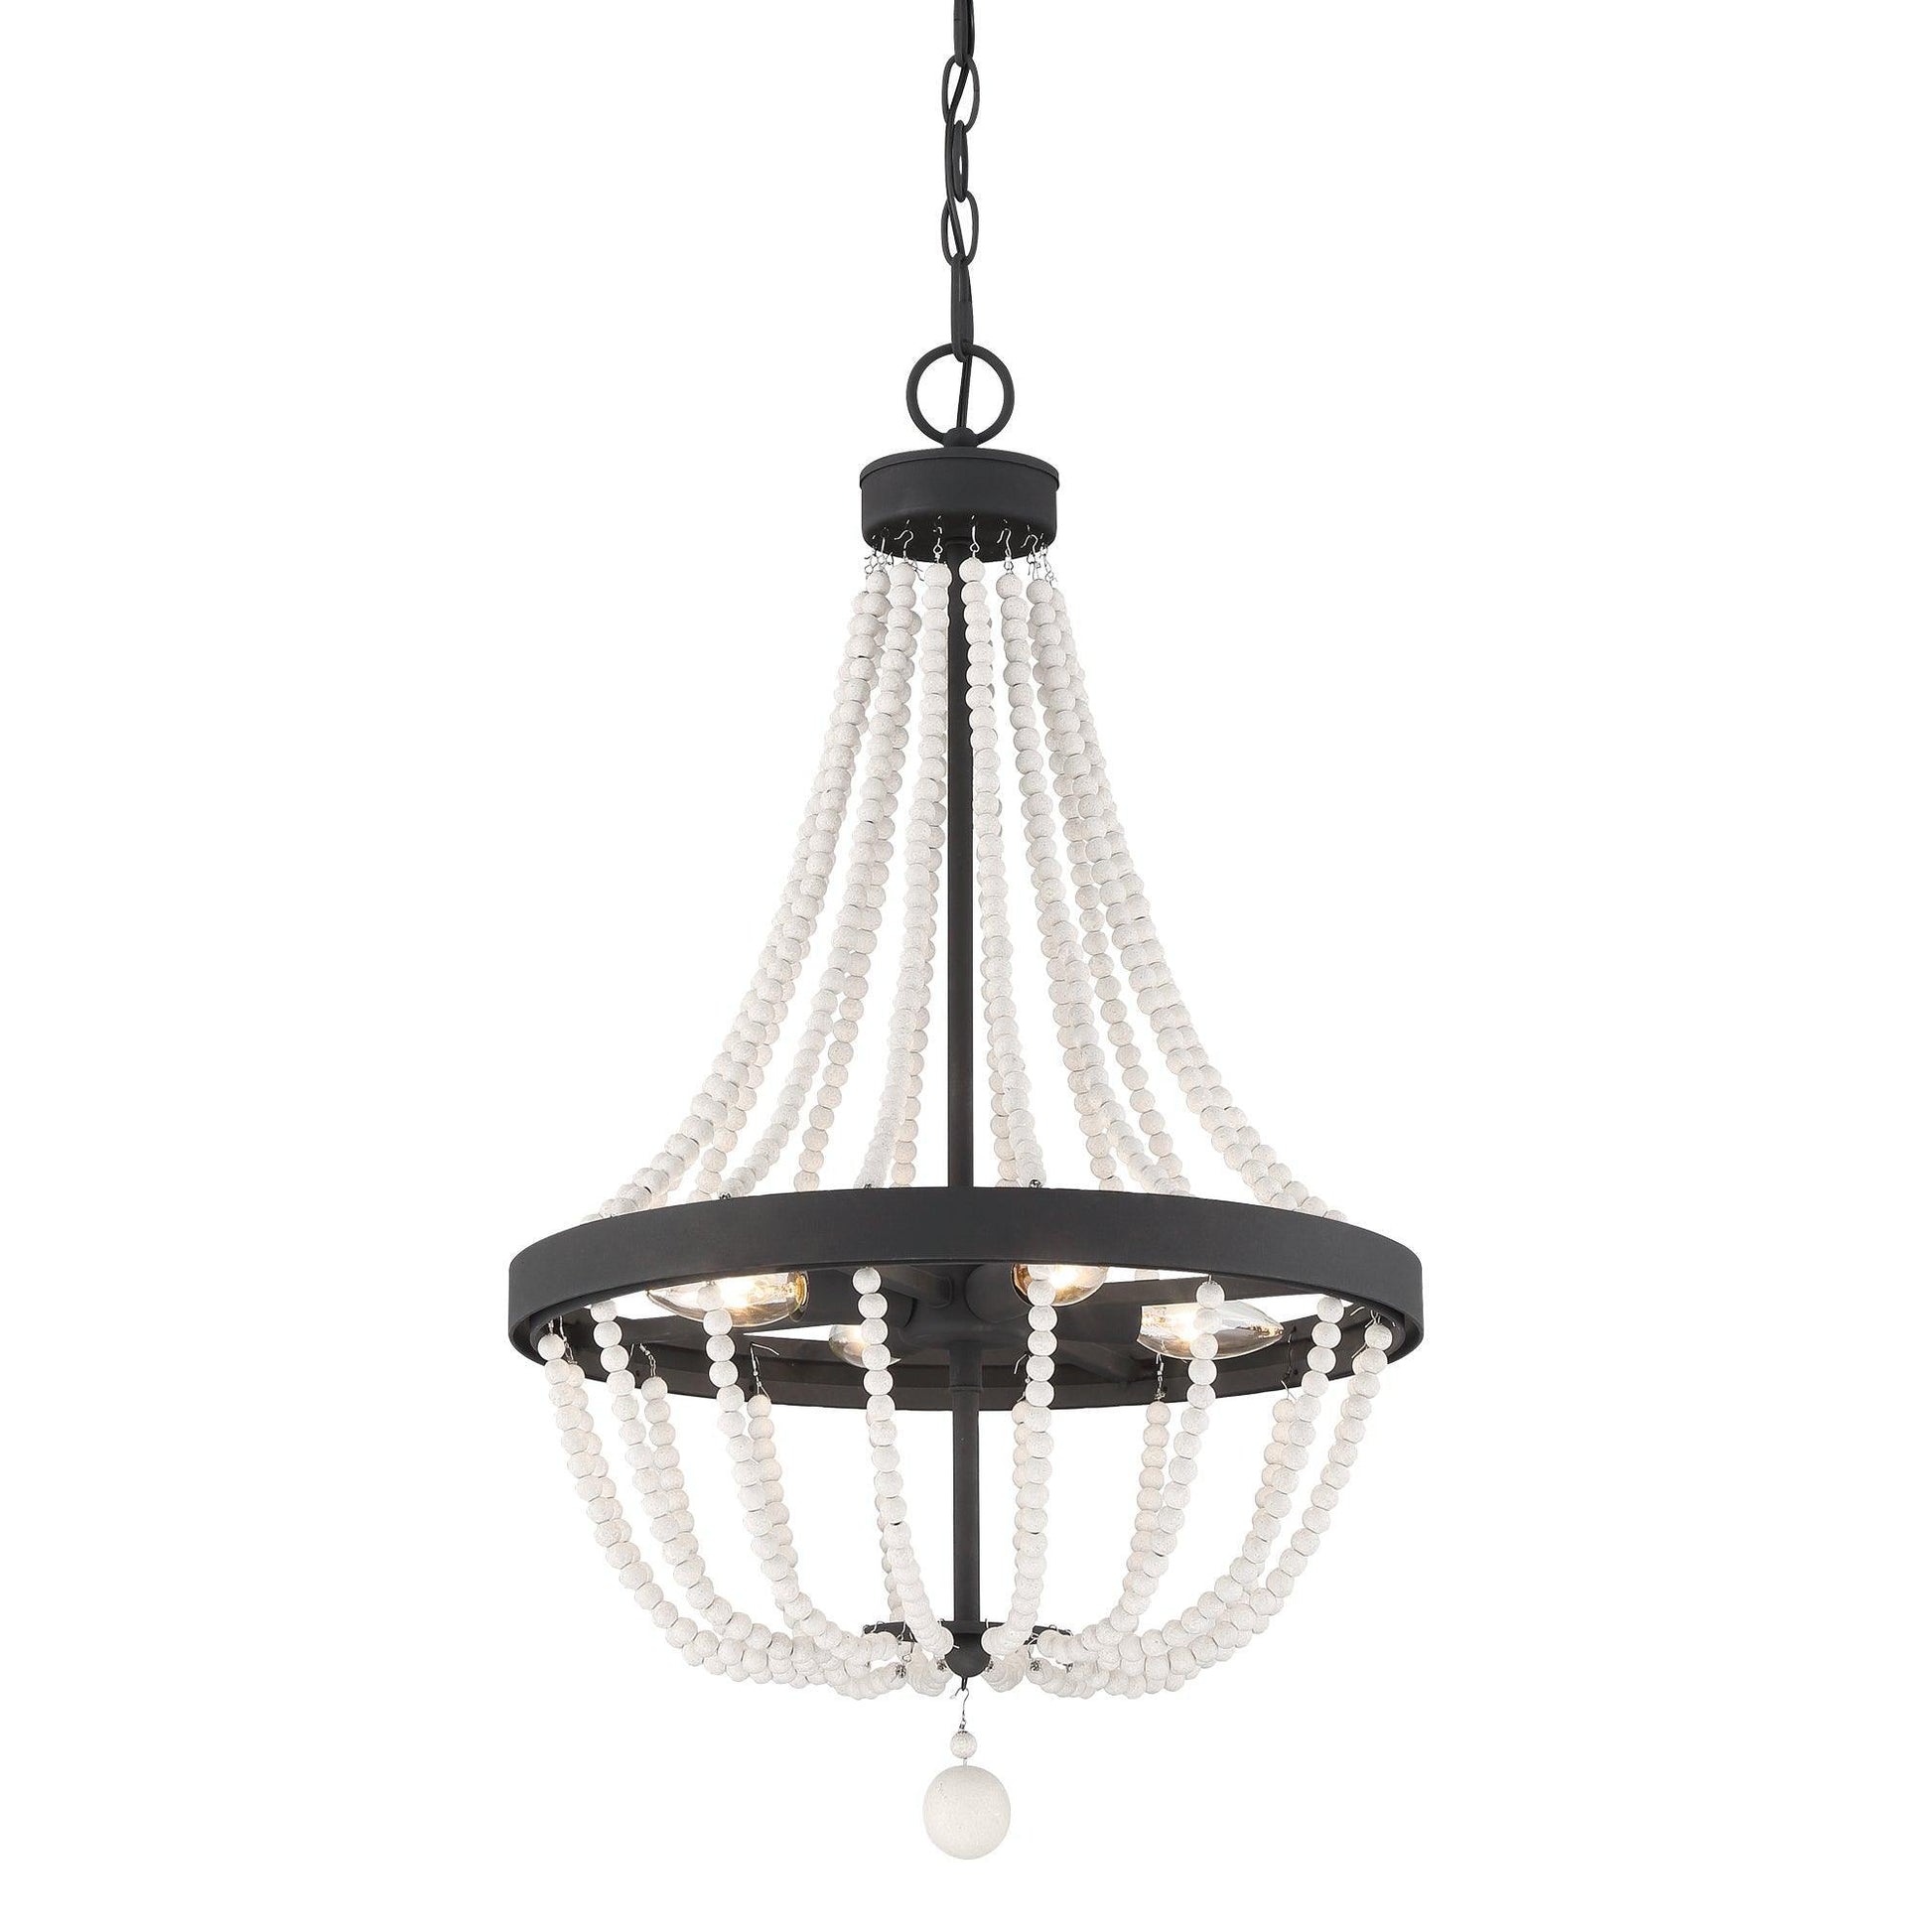 5904 | 4 - Light Candle Style Chandelier With Beaded Accents by ACROMA™  UL - ACROMA